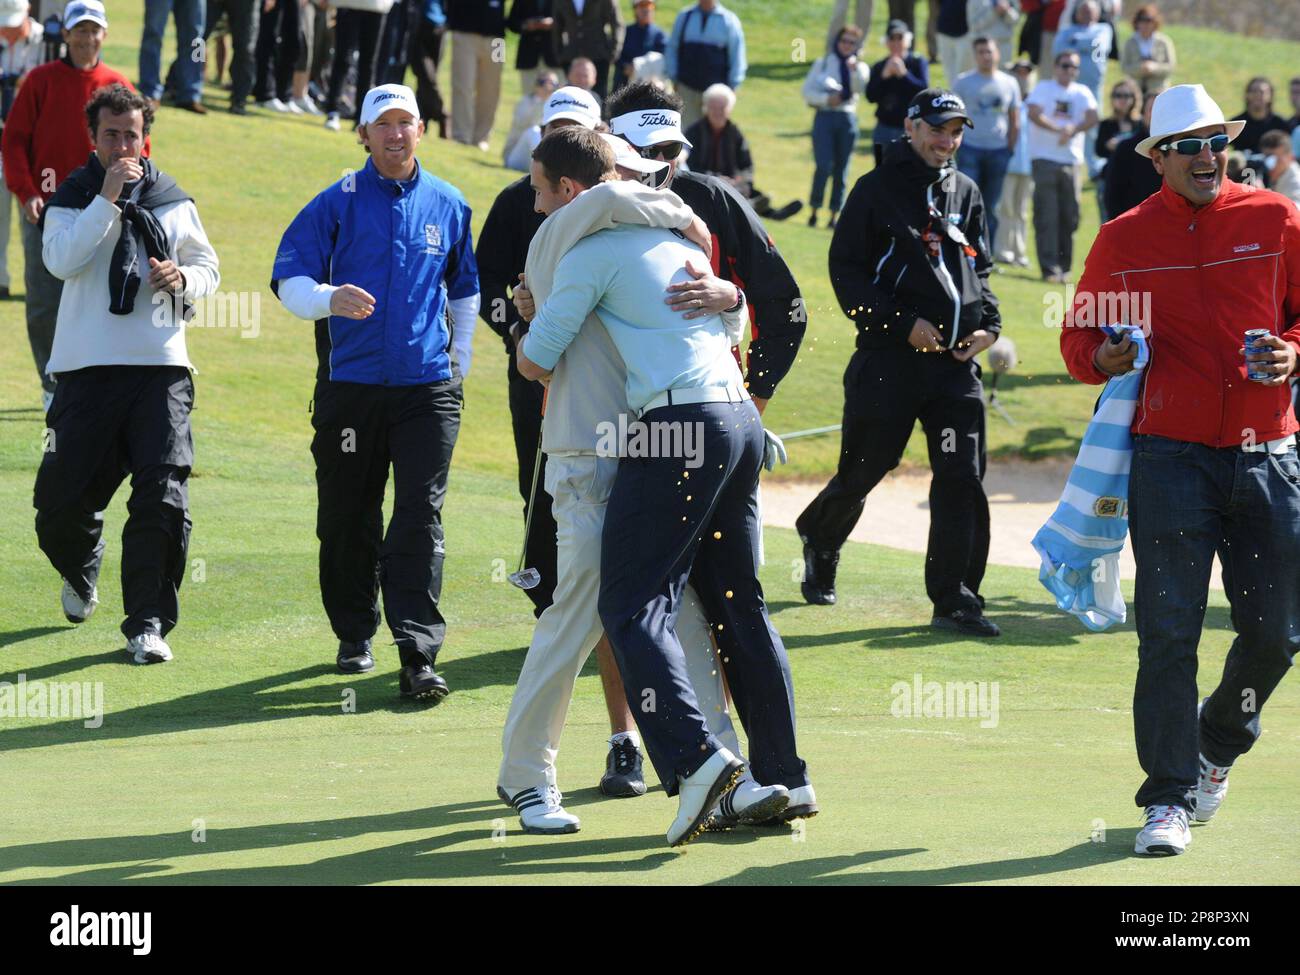 Estanislao Goya, center with back to camera, from Argentina, is hugged by  fellow golfer and countryman Clodomiro Carranza after winning the Madeira  Islands Open golf tournament Sunday, March 22, 2009 at the